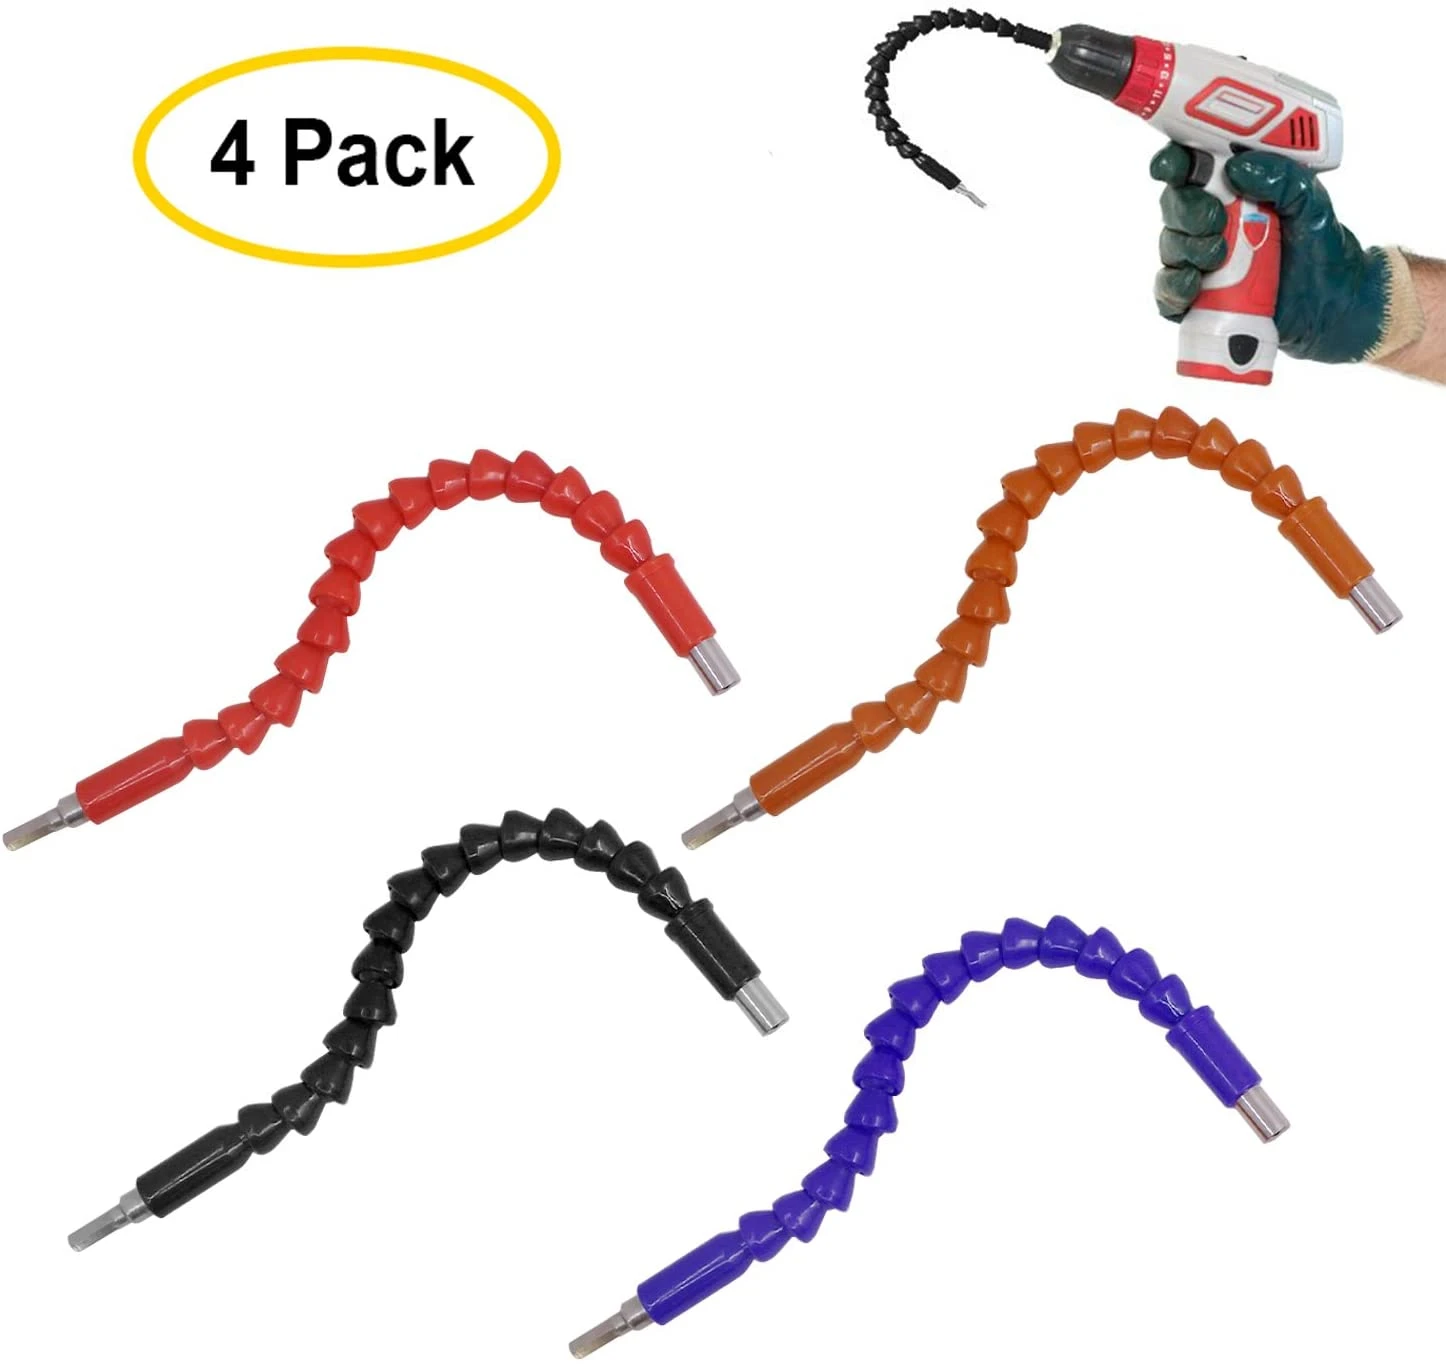 4 pack Flexible Drill Bit Extension, Screwdriver Soft Shafts 11.6 inch Universal Drill Connection